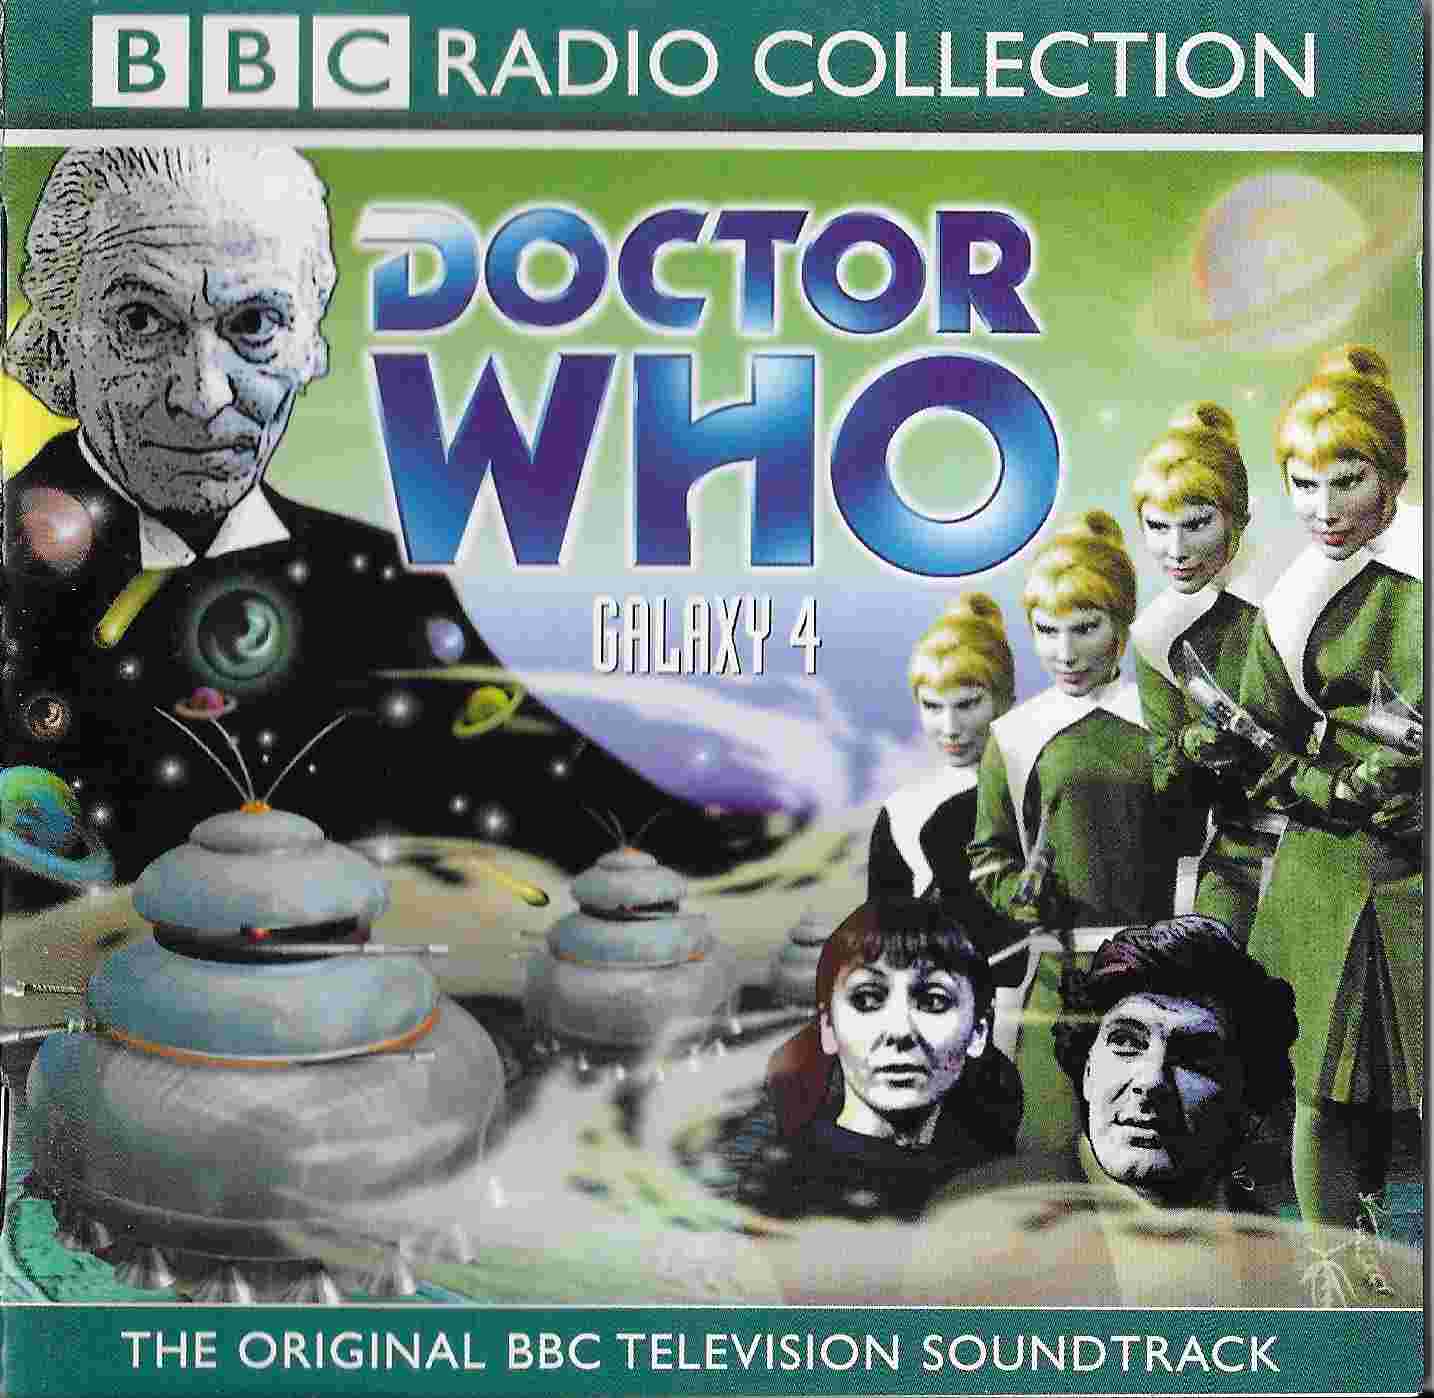 Picture of Doctor Who - Galaxy 4 by artist William Emms from the BBC cds - Records and Tapes library